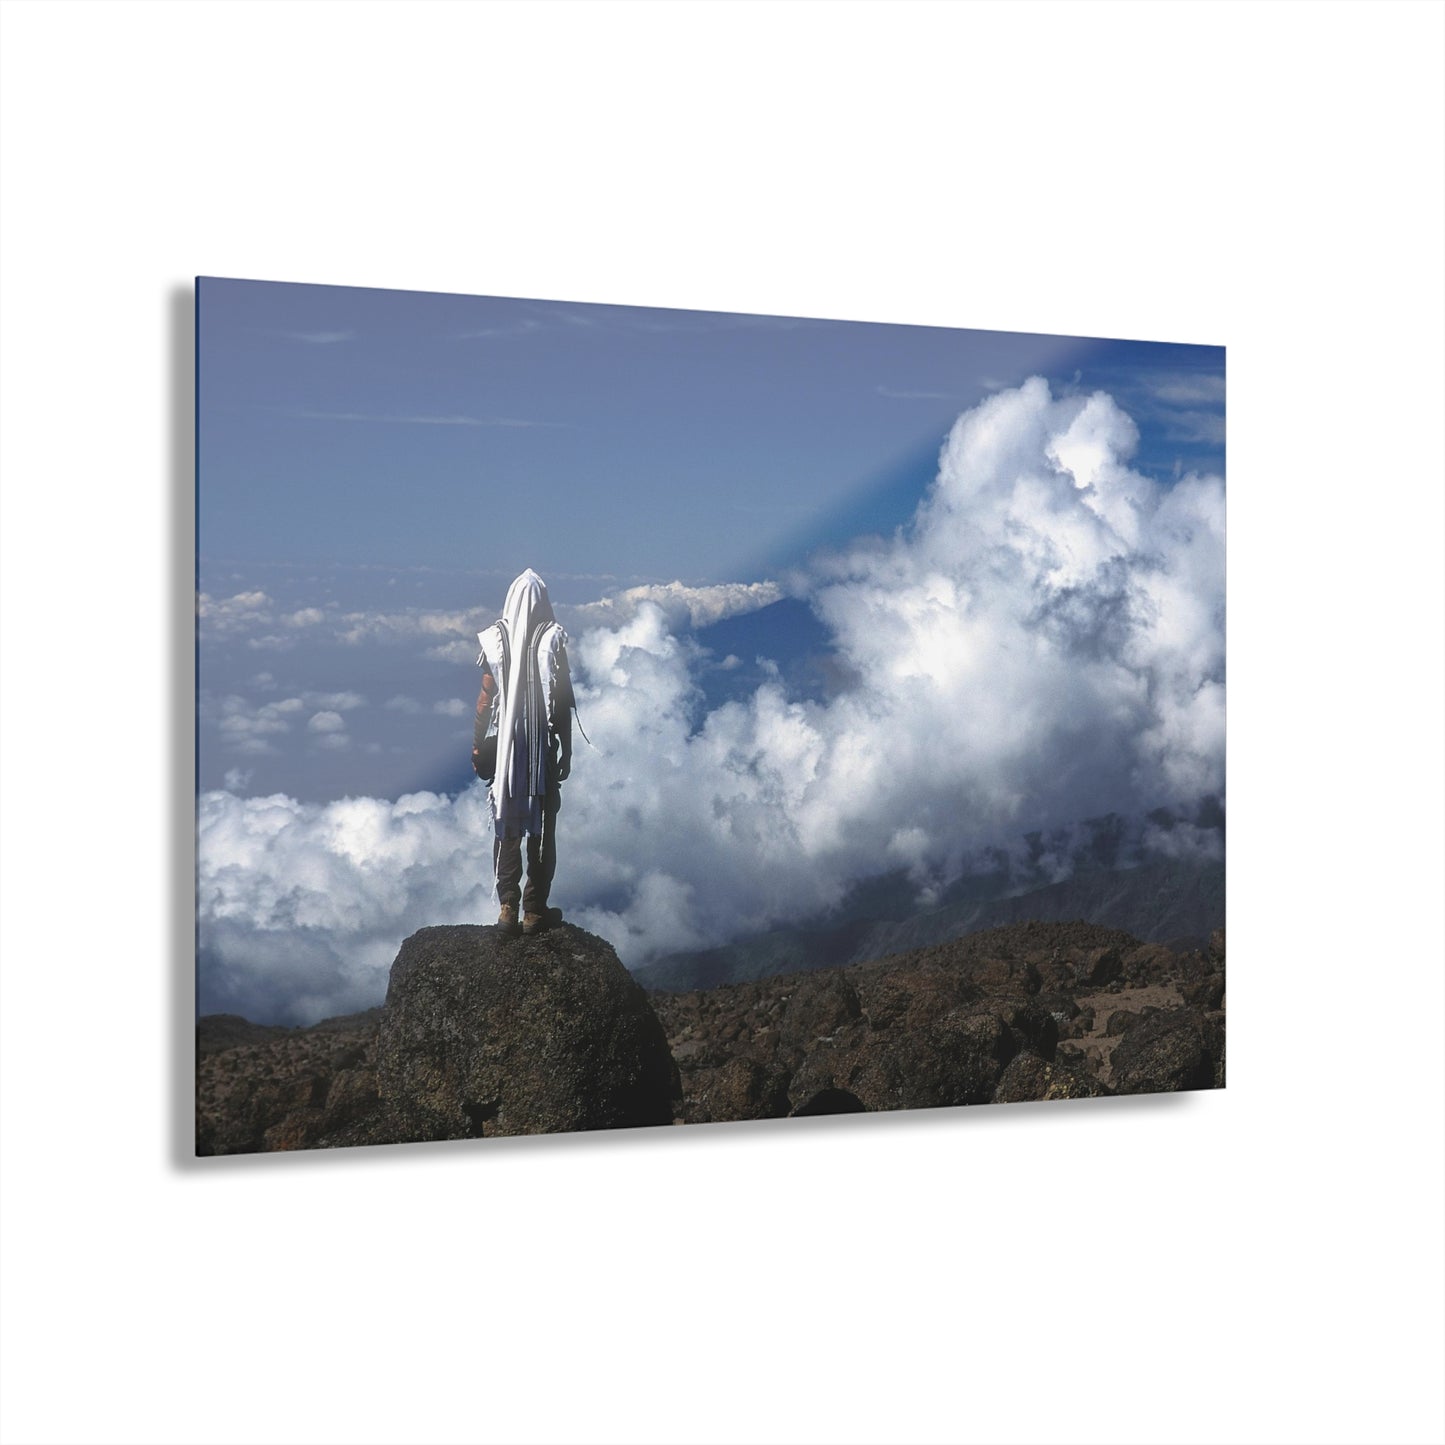 Song of Ascent by Yehoshua Halevi Photograph - Glossy Acrylic Print (French Cleat Hanging)